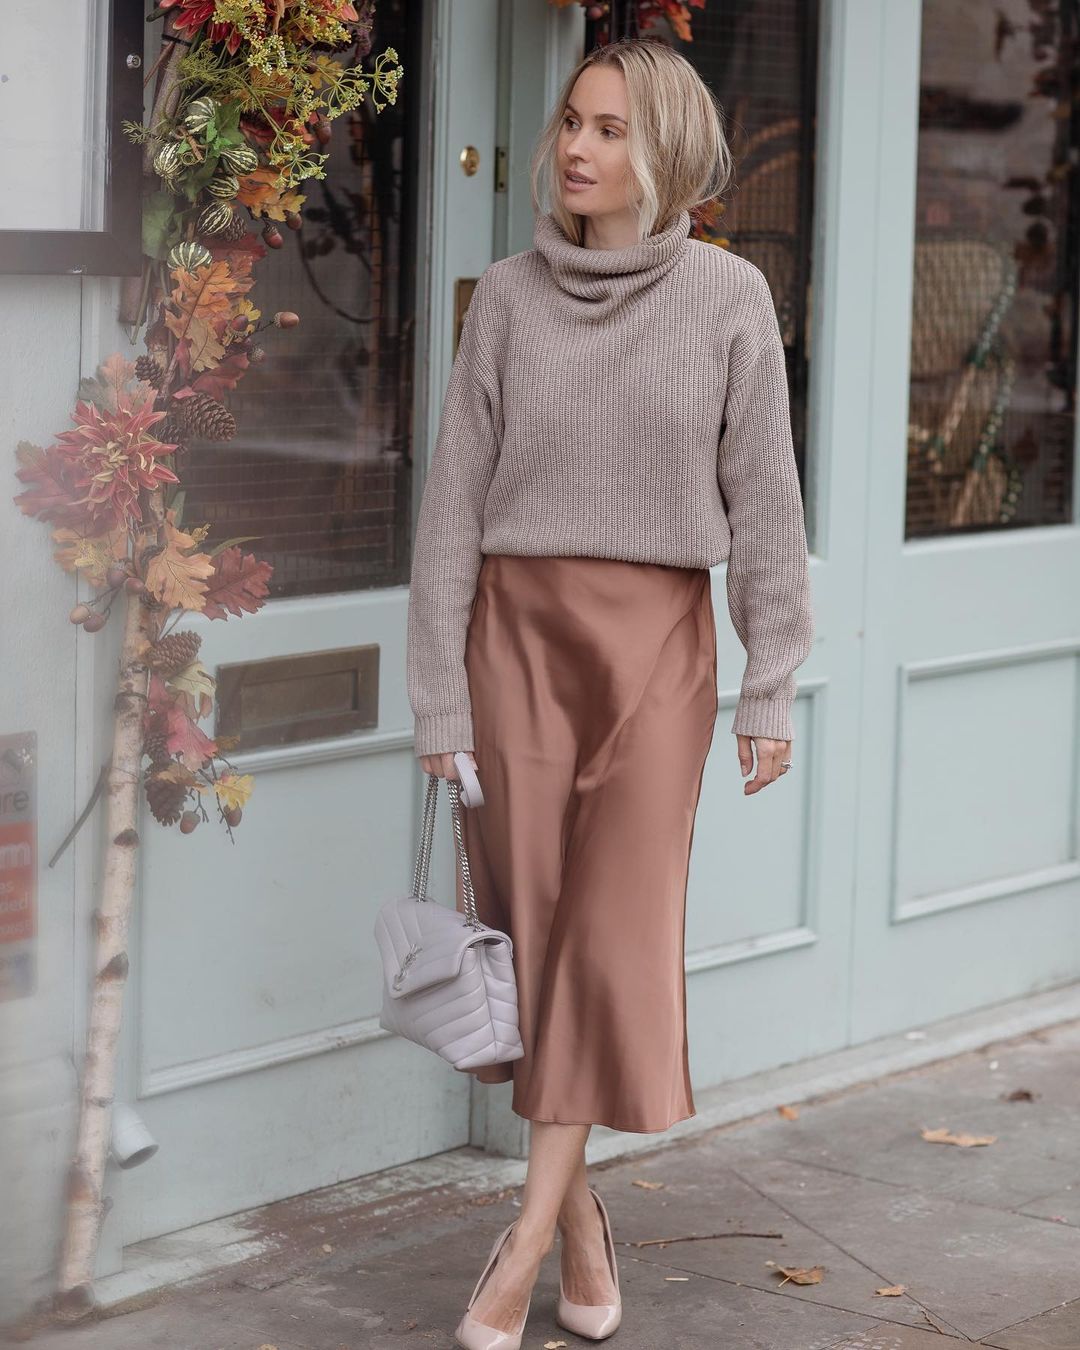 Most Fashionable Fall Skirt Trend Outfit Ideas 